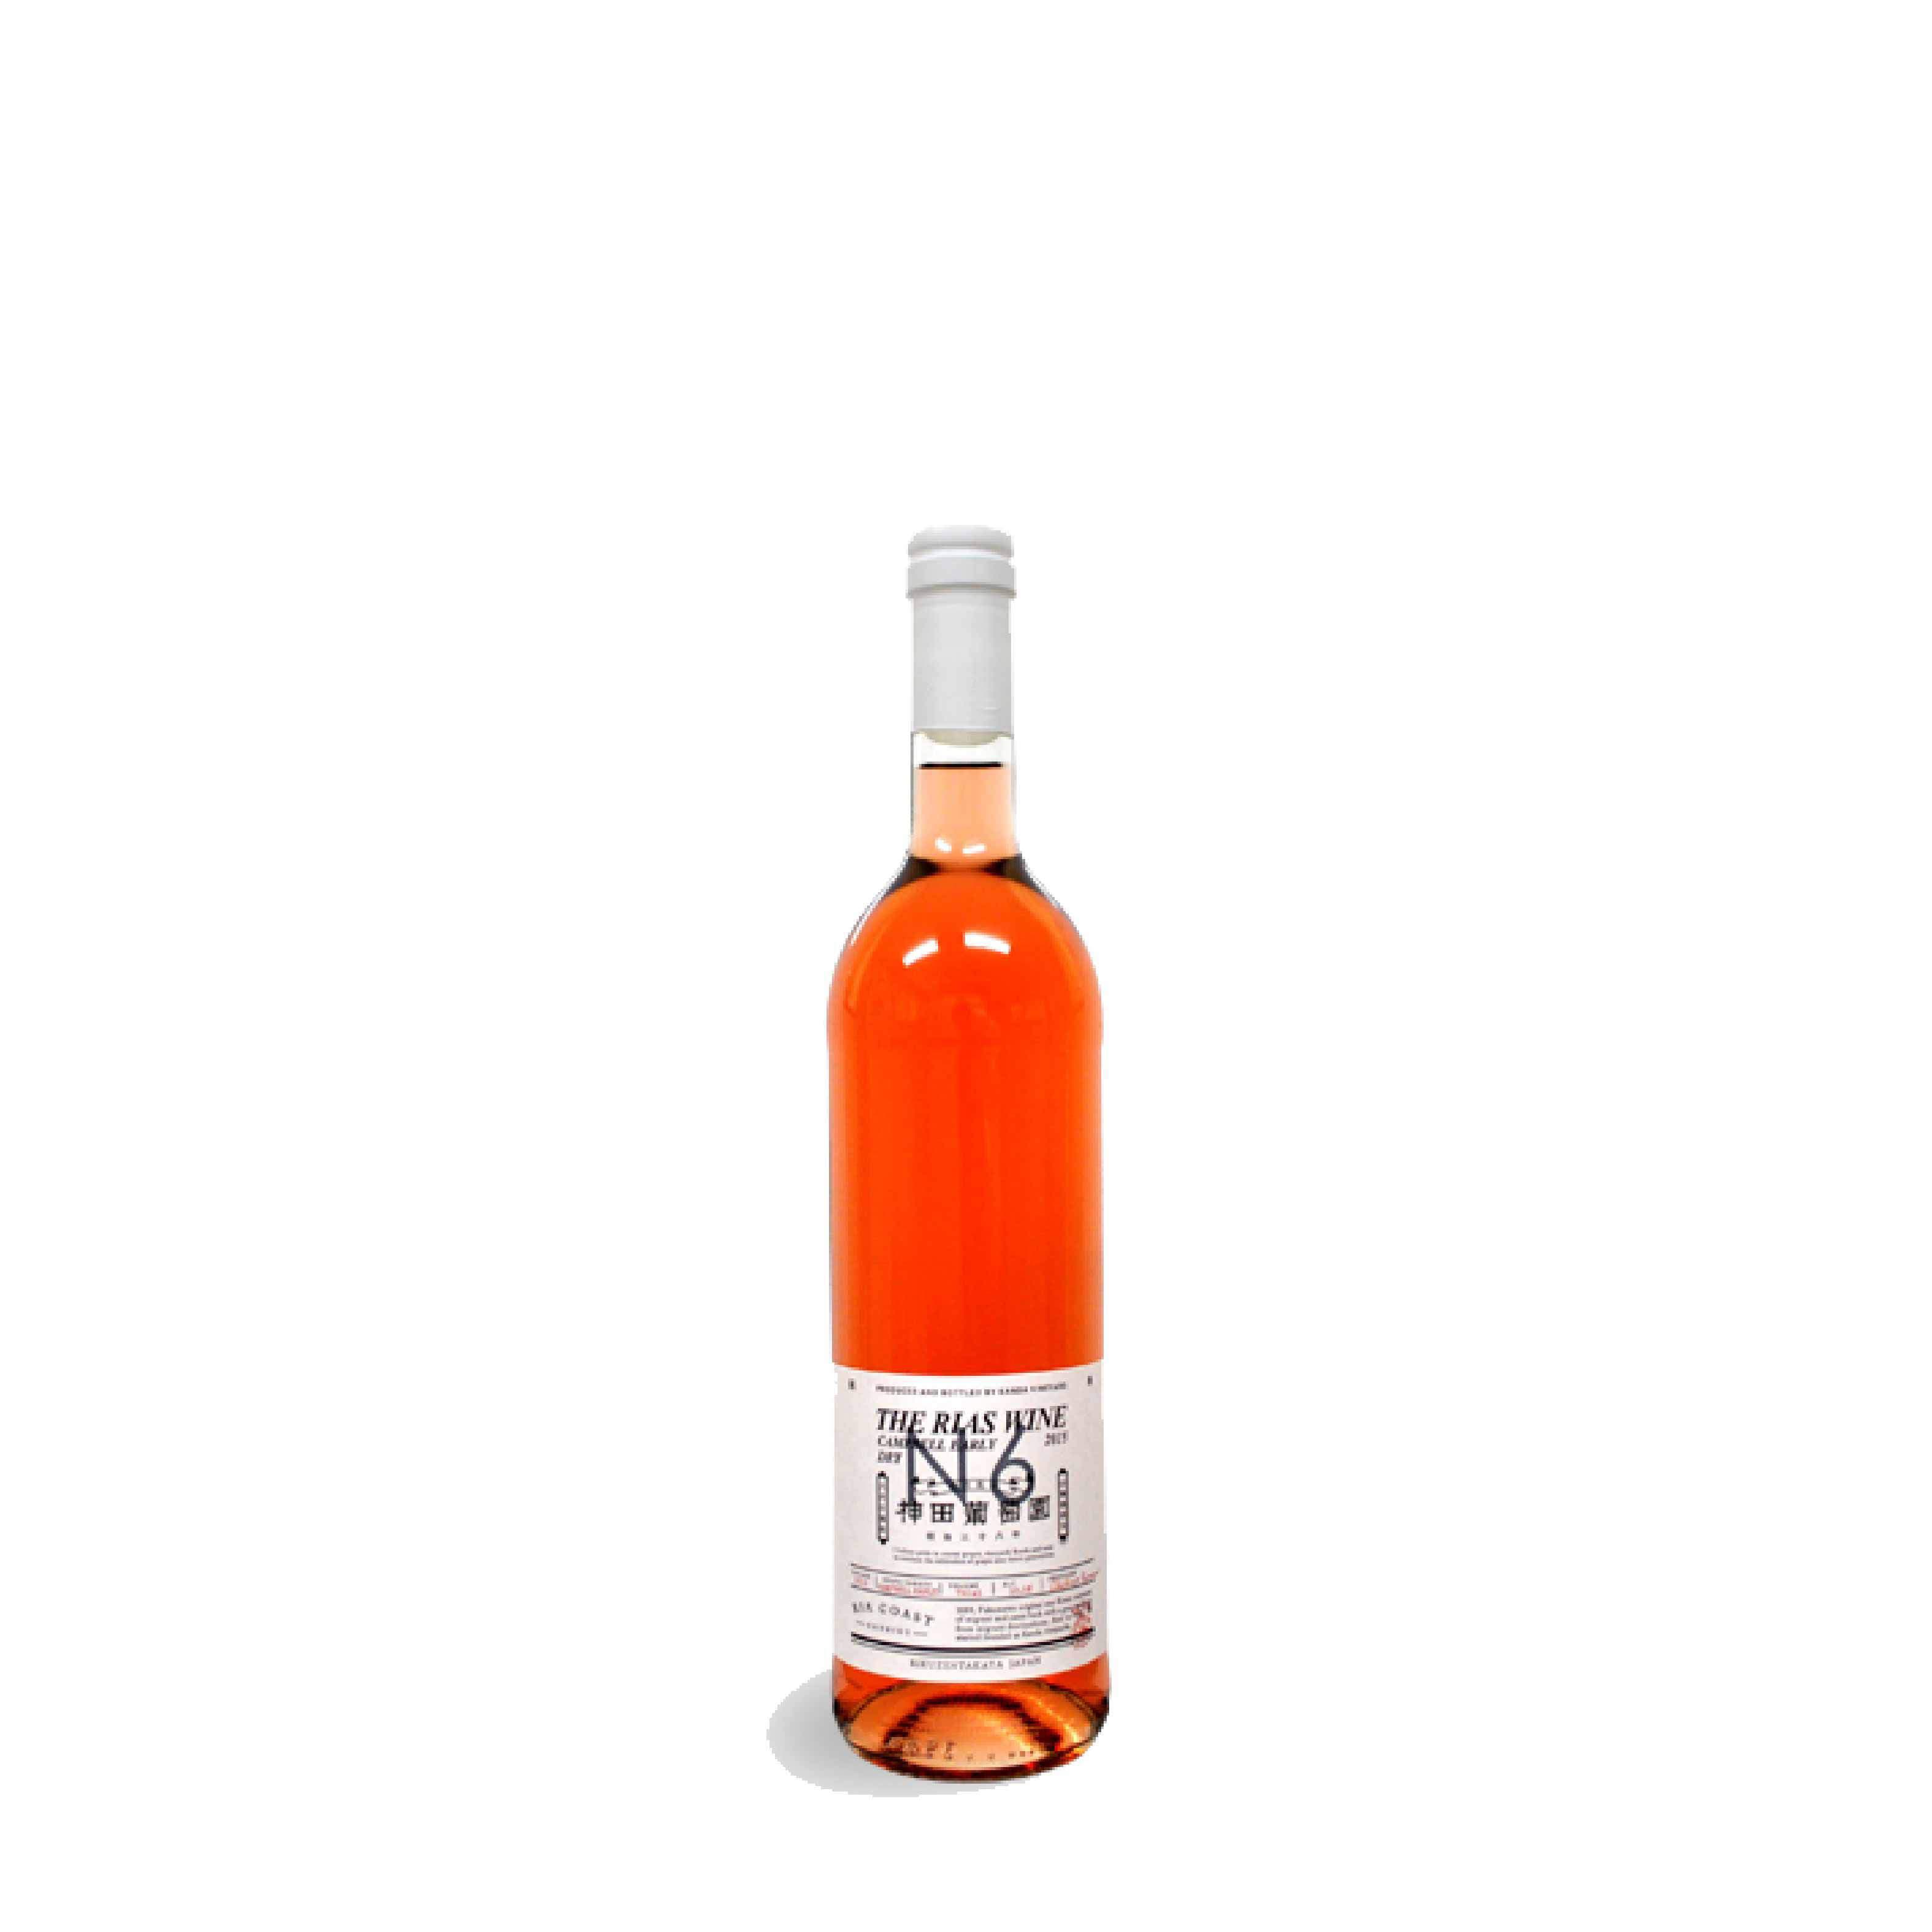 CAMPBELL EARLY ROSE DRY